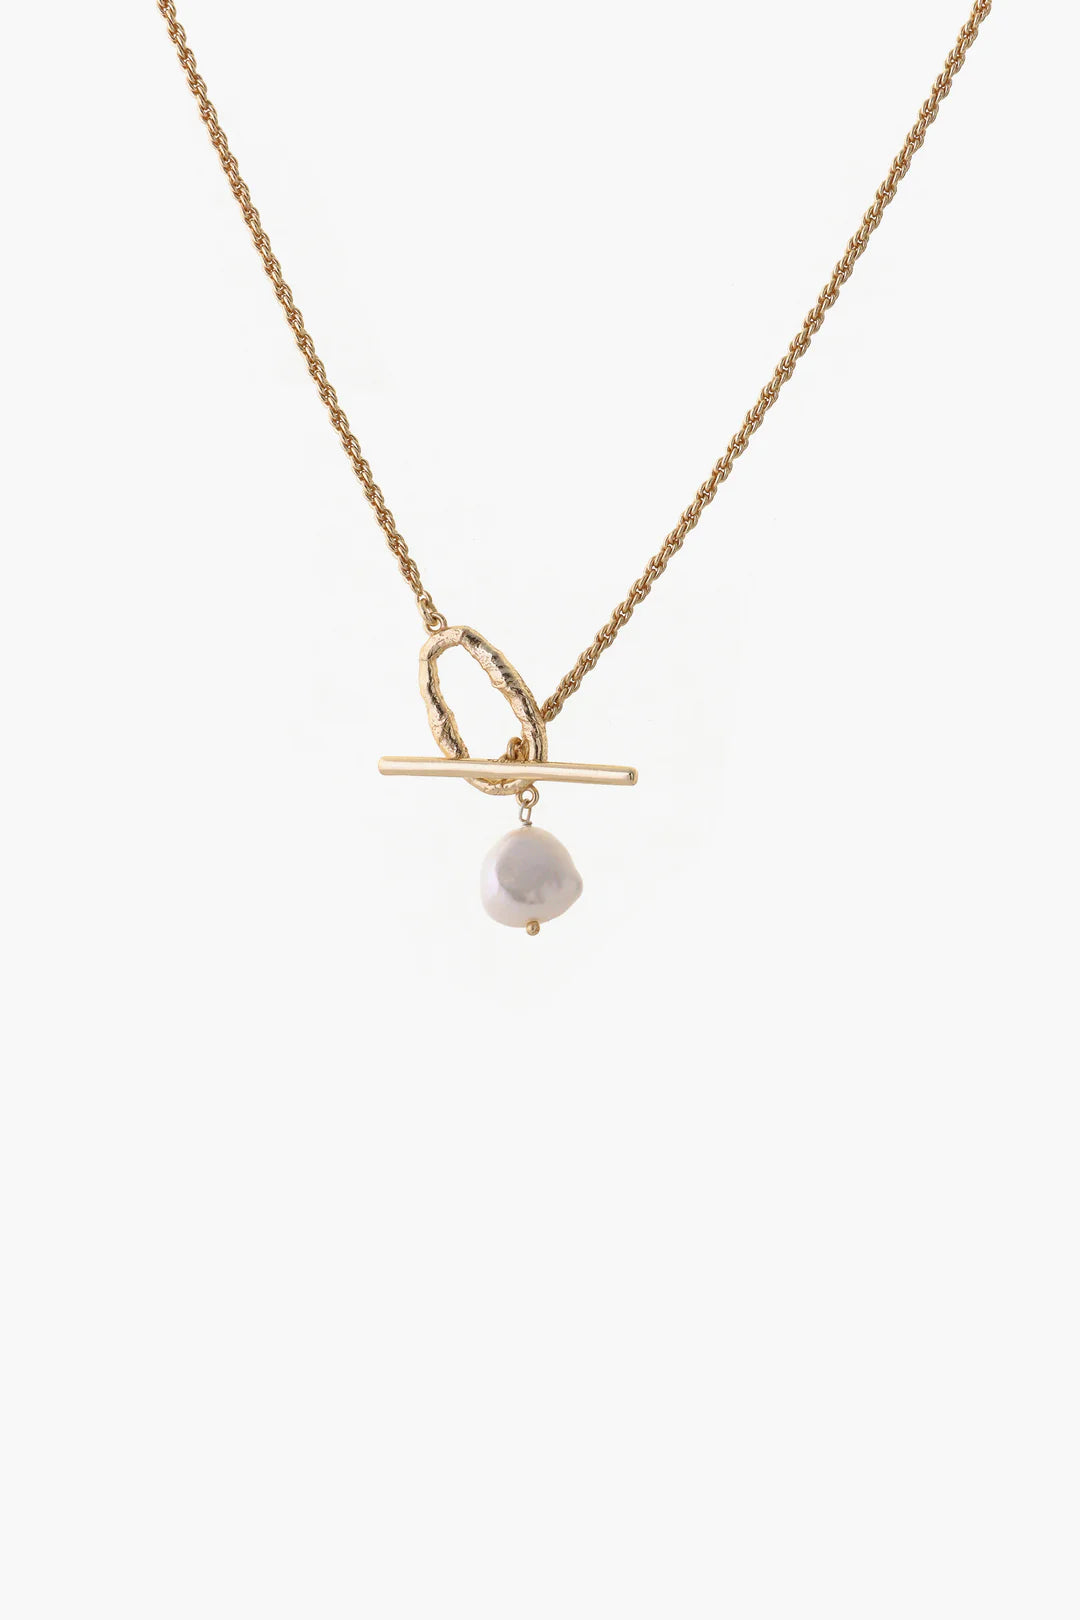 GOLD CLARITY NECKLACE